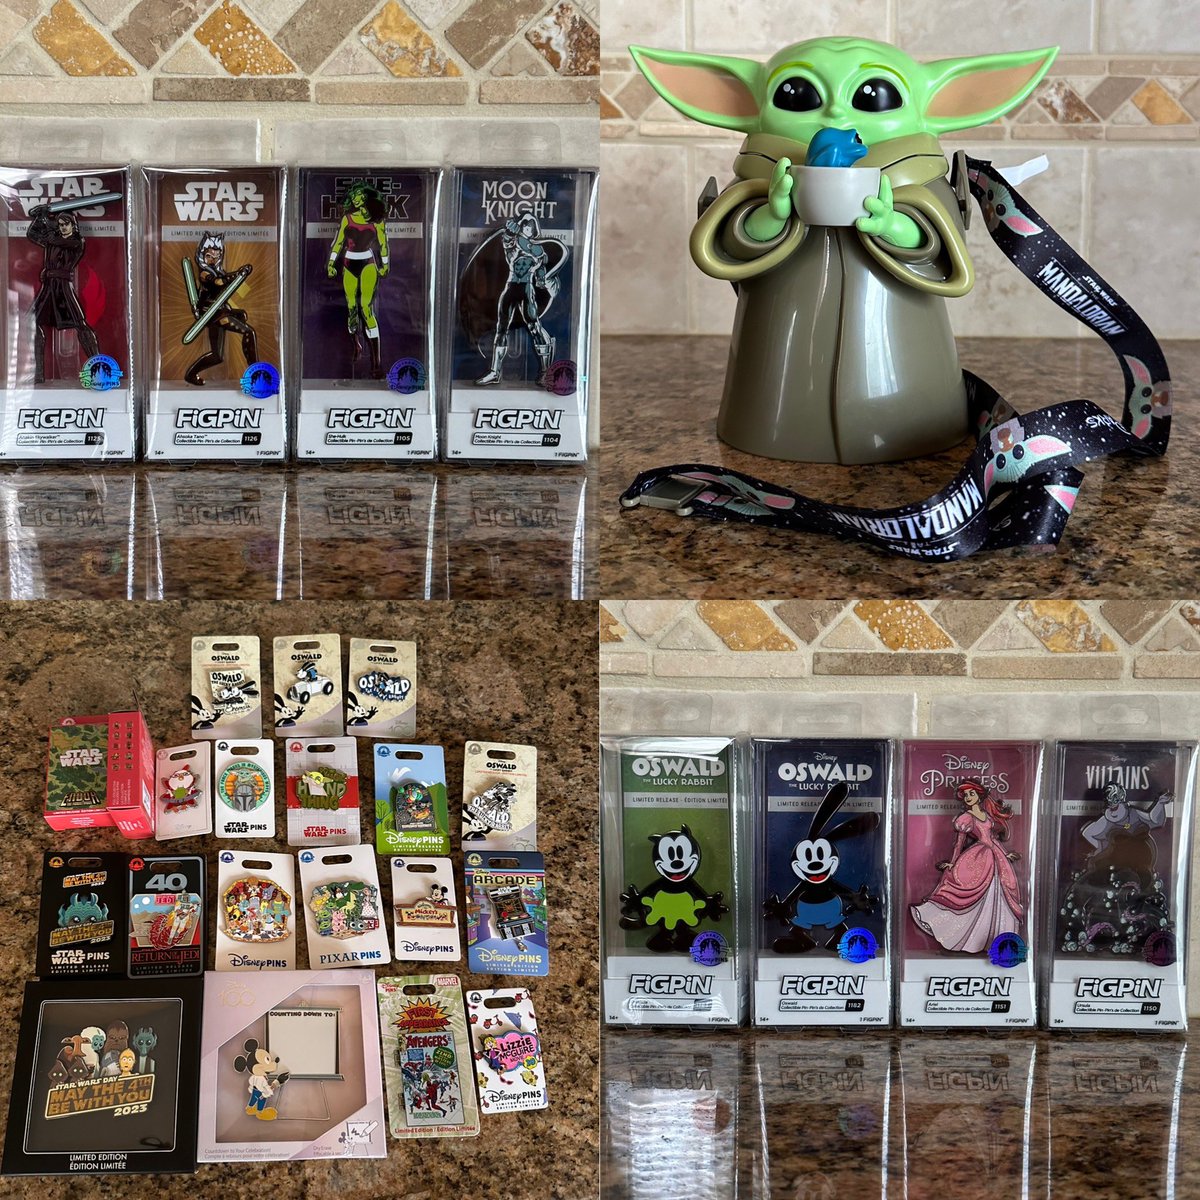 Disneyland Haul - Picked up some Pins, FiGPiNs, and Grogu Sipper!
.
#Disney #DisneyPins #DisneyPinTrading #Collectibles #FiGPiN #FiGPiNs #TheMandalorian #StarWars #Marvel #Grogu #maythe4thbewithyou #DisTrackers